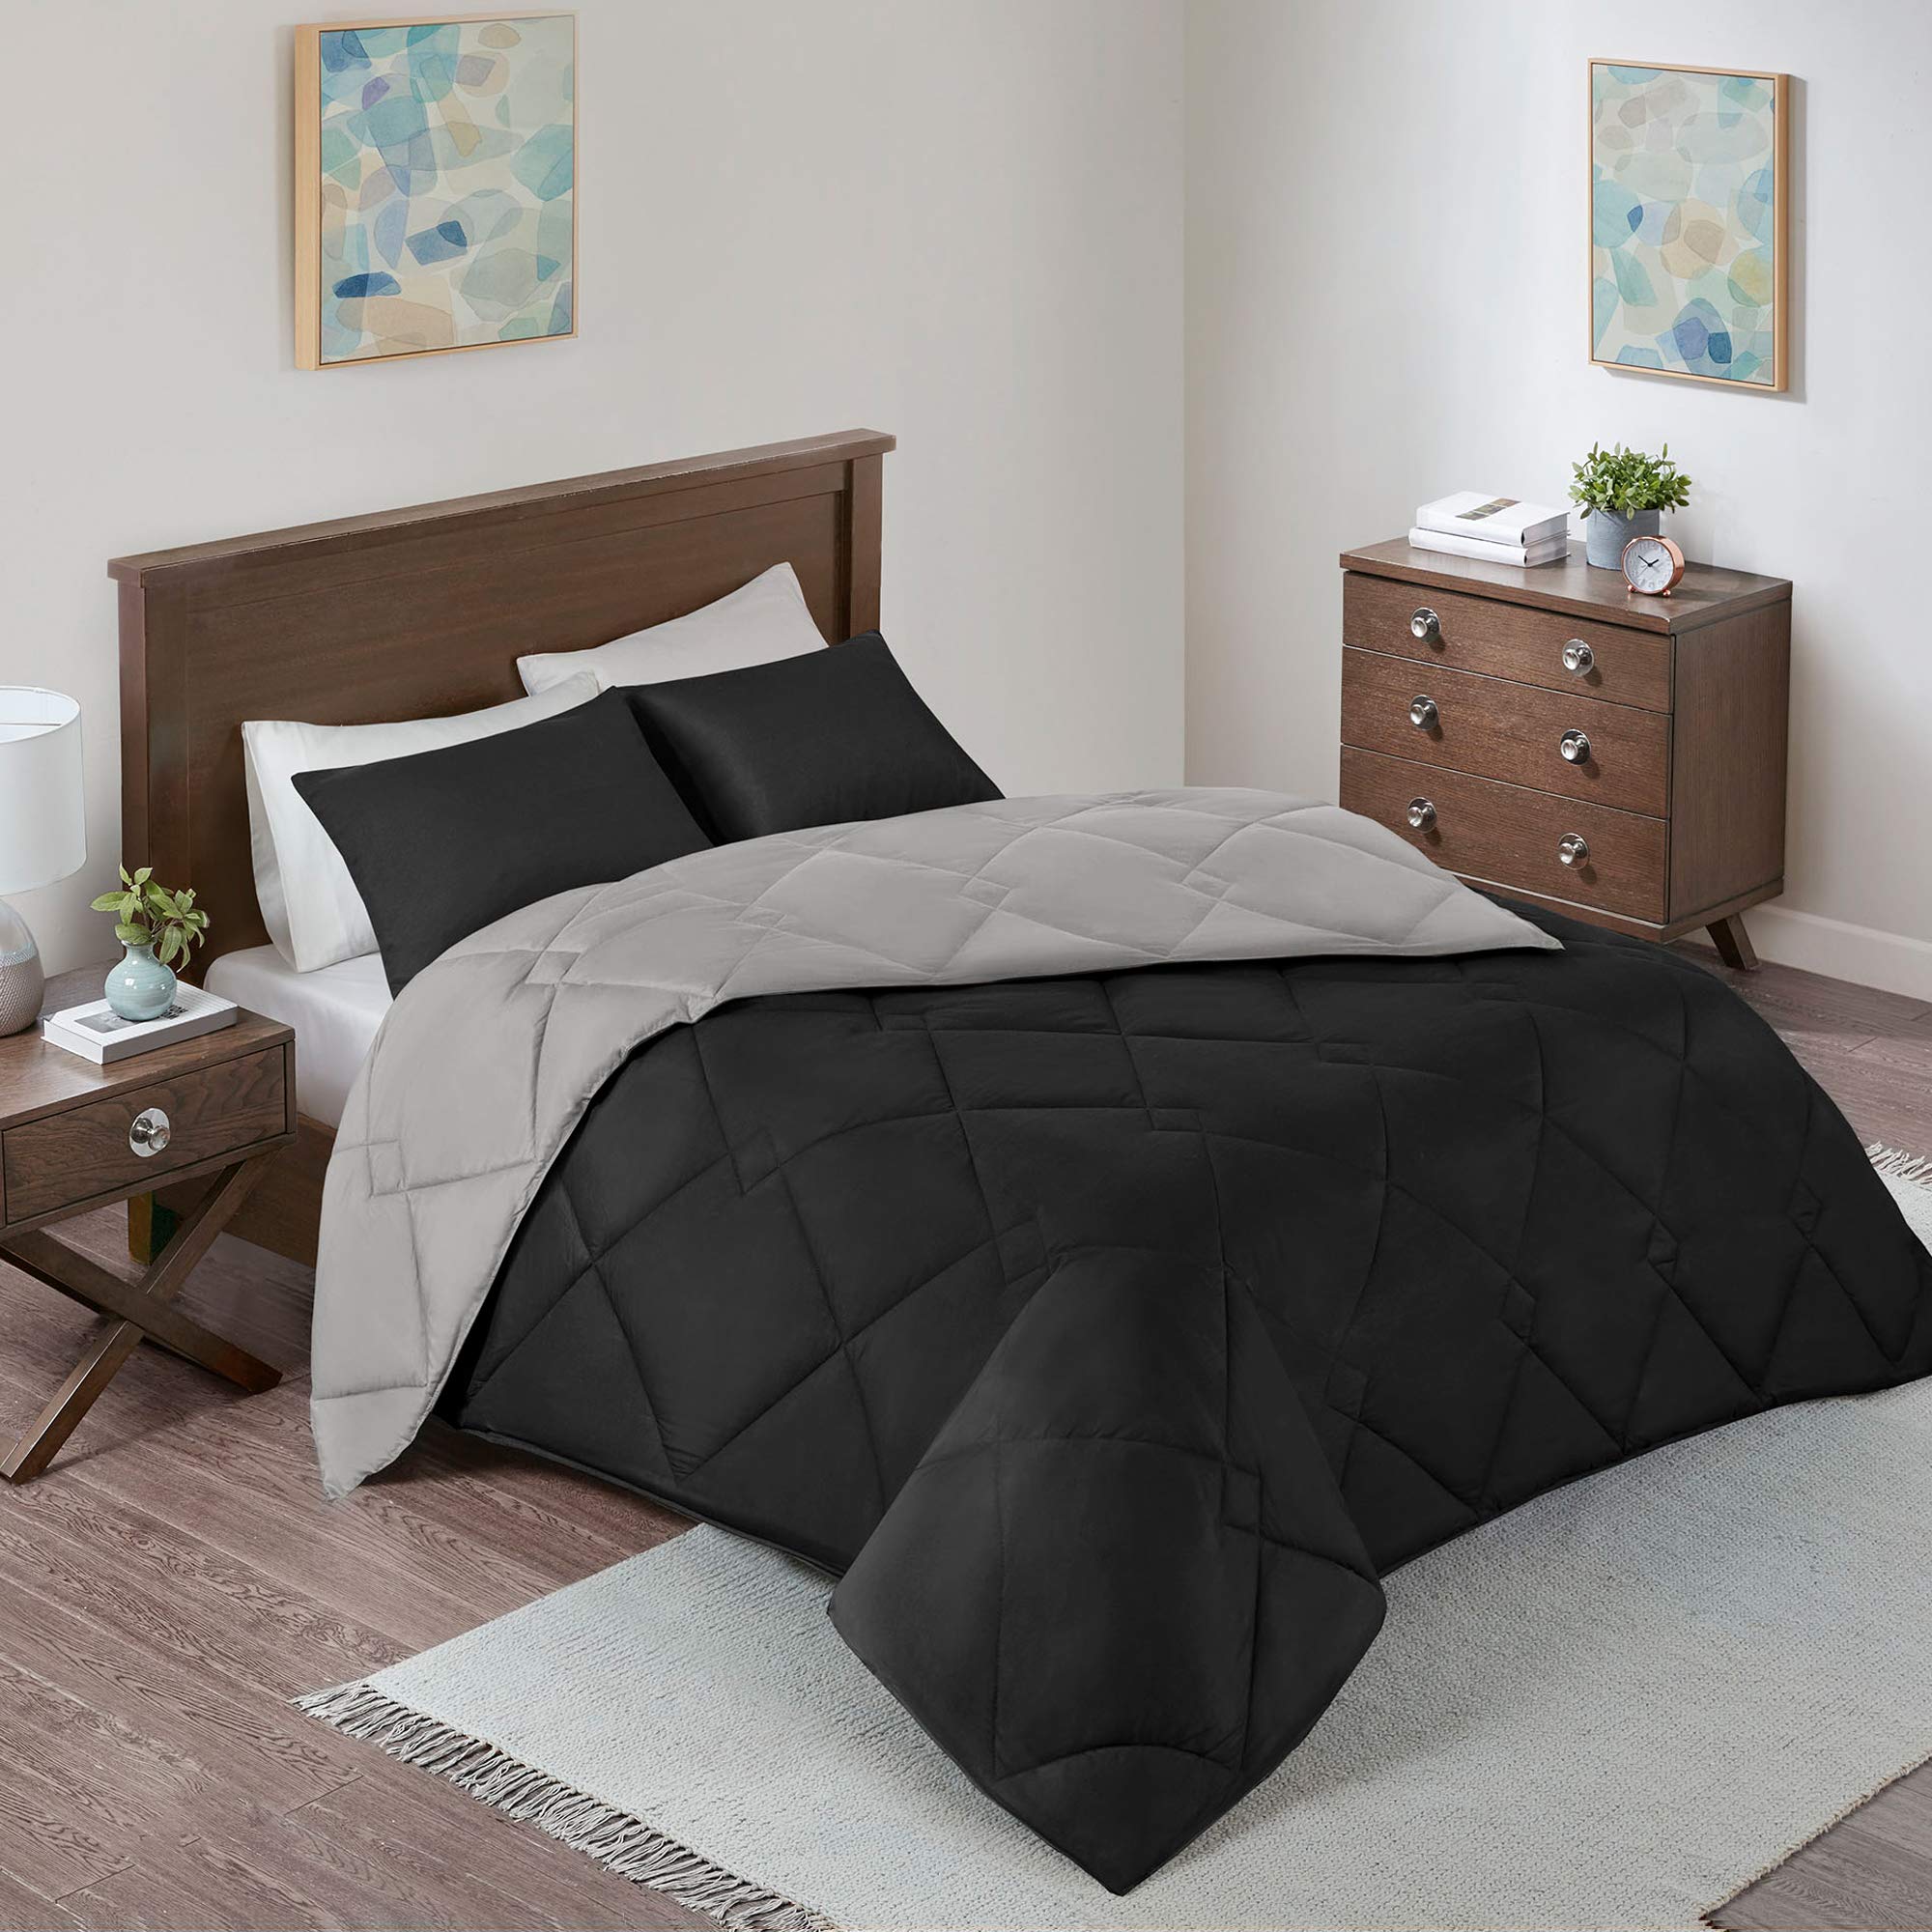 Book Cover Comfort Spaces Vixie Reversible Comforter Set - Trendy Casual Geometric Quilted Cover, All Season Down Alternative Cozy Bedding, Matching Sham, Black/Gray, Full/Queen 3 piece Black/Grey Full/Queen